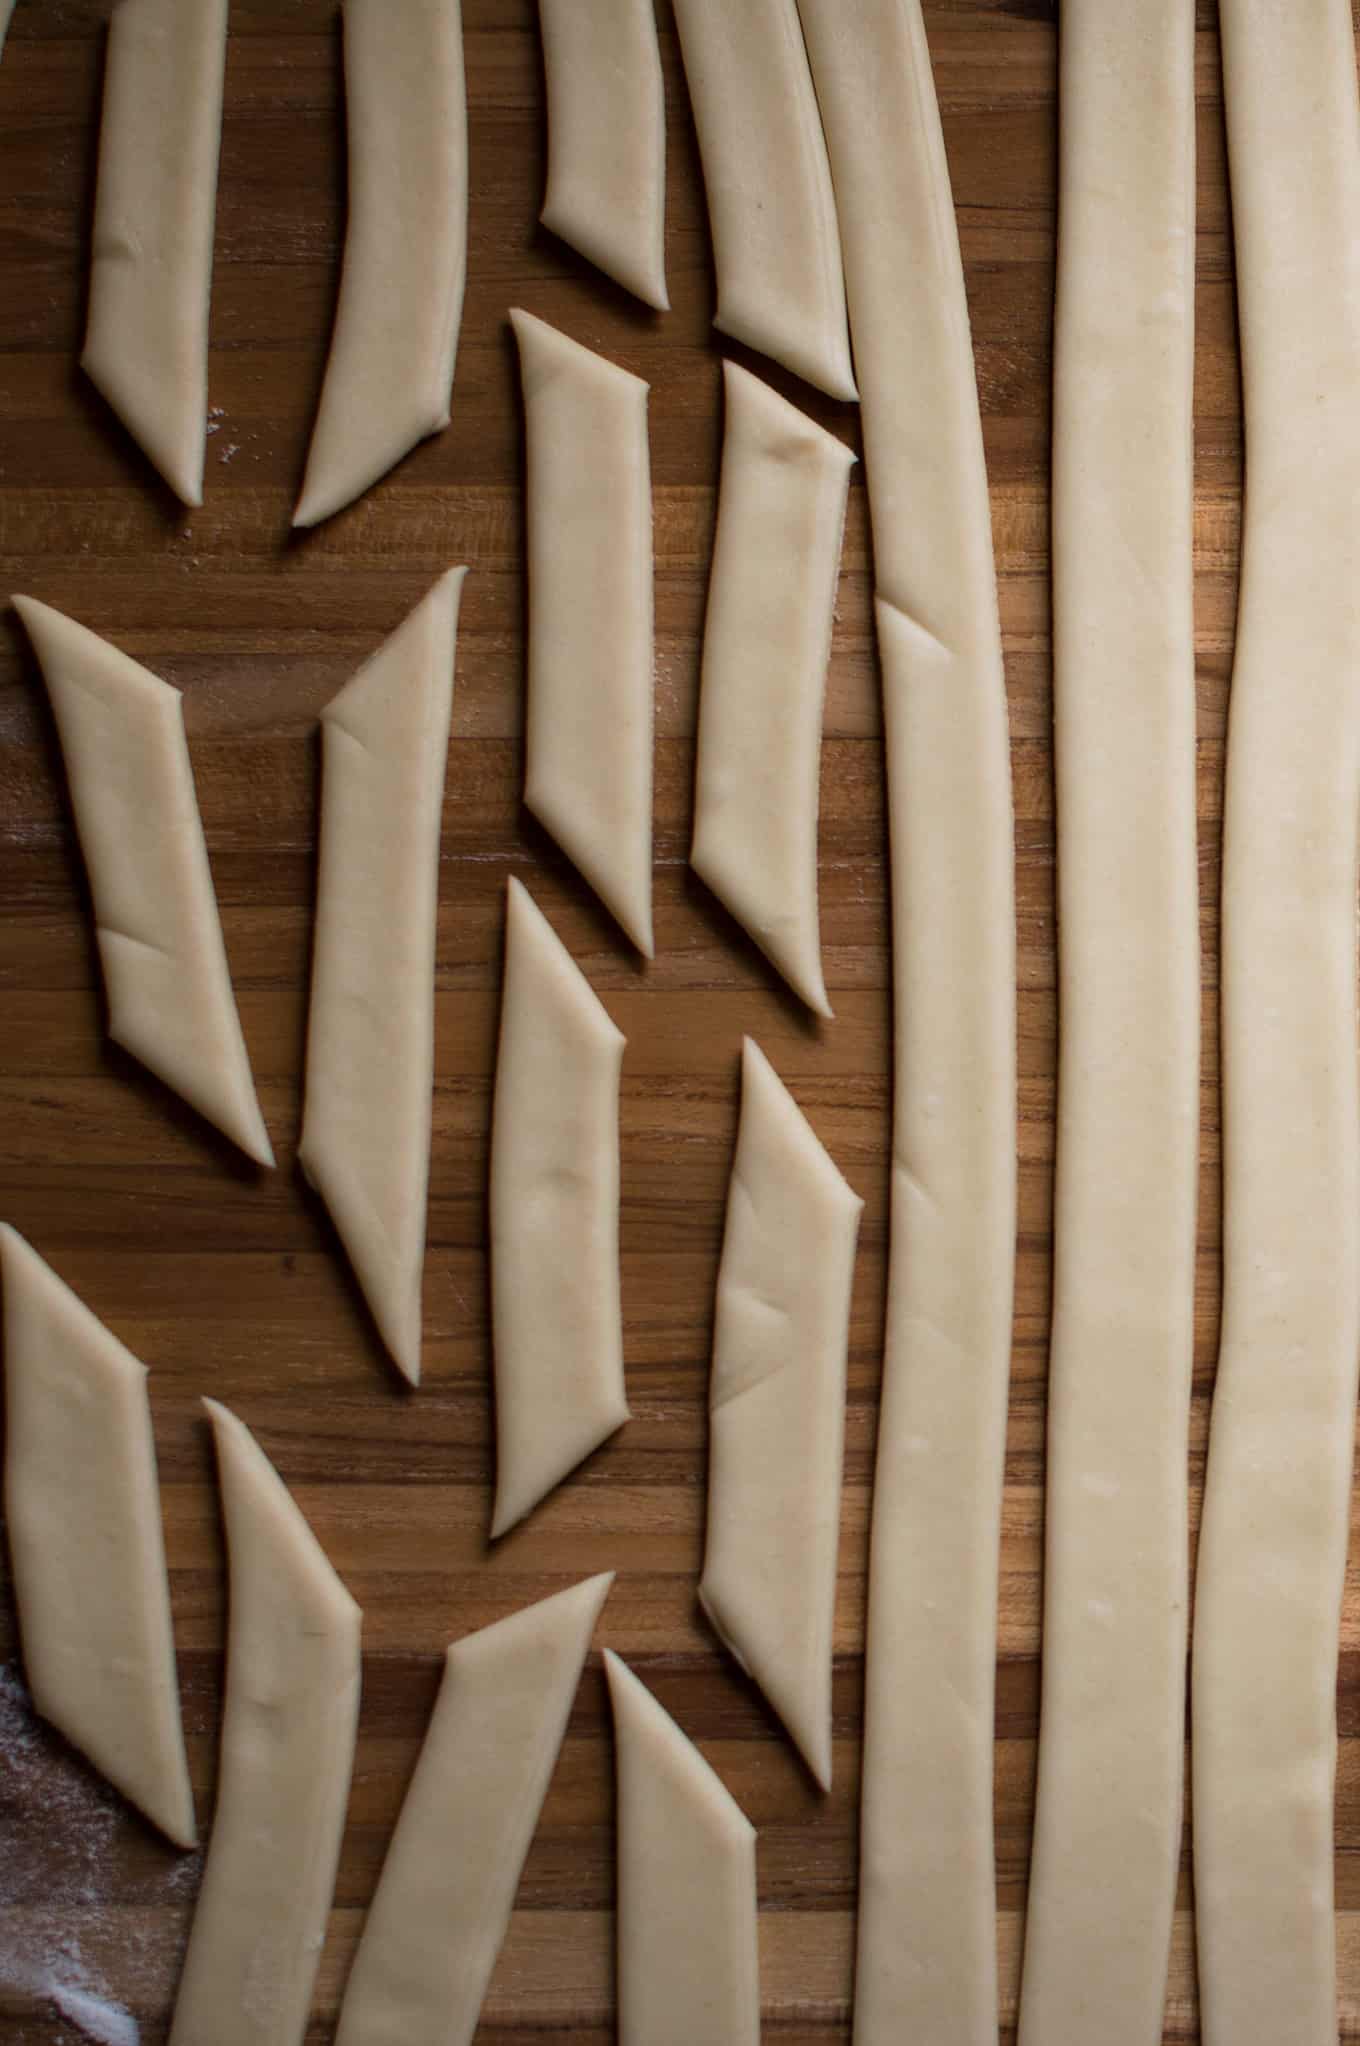 Short and thin strips of thinly cut dough.